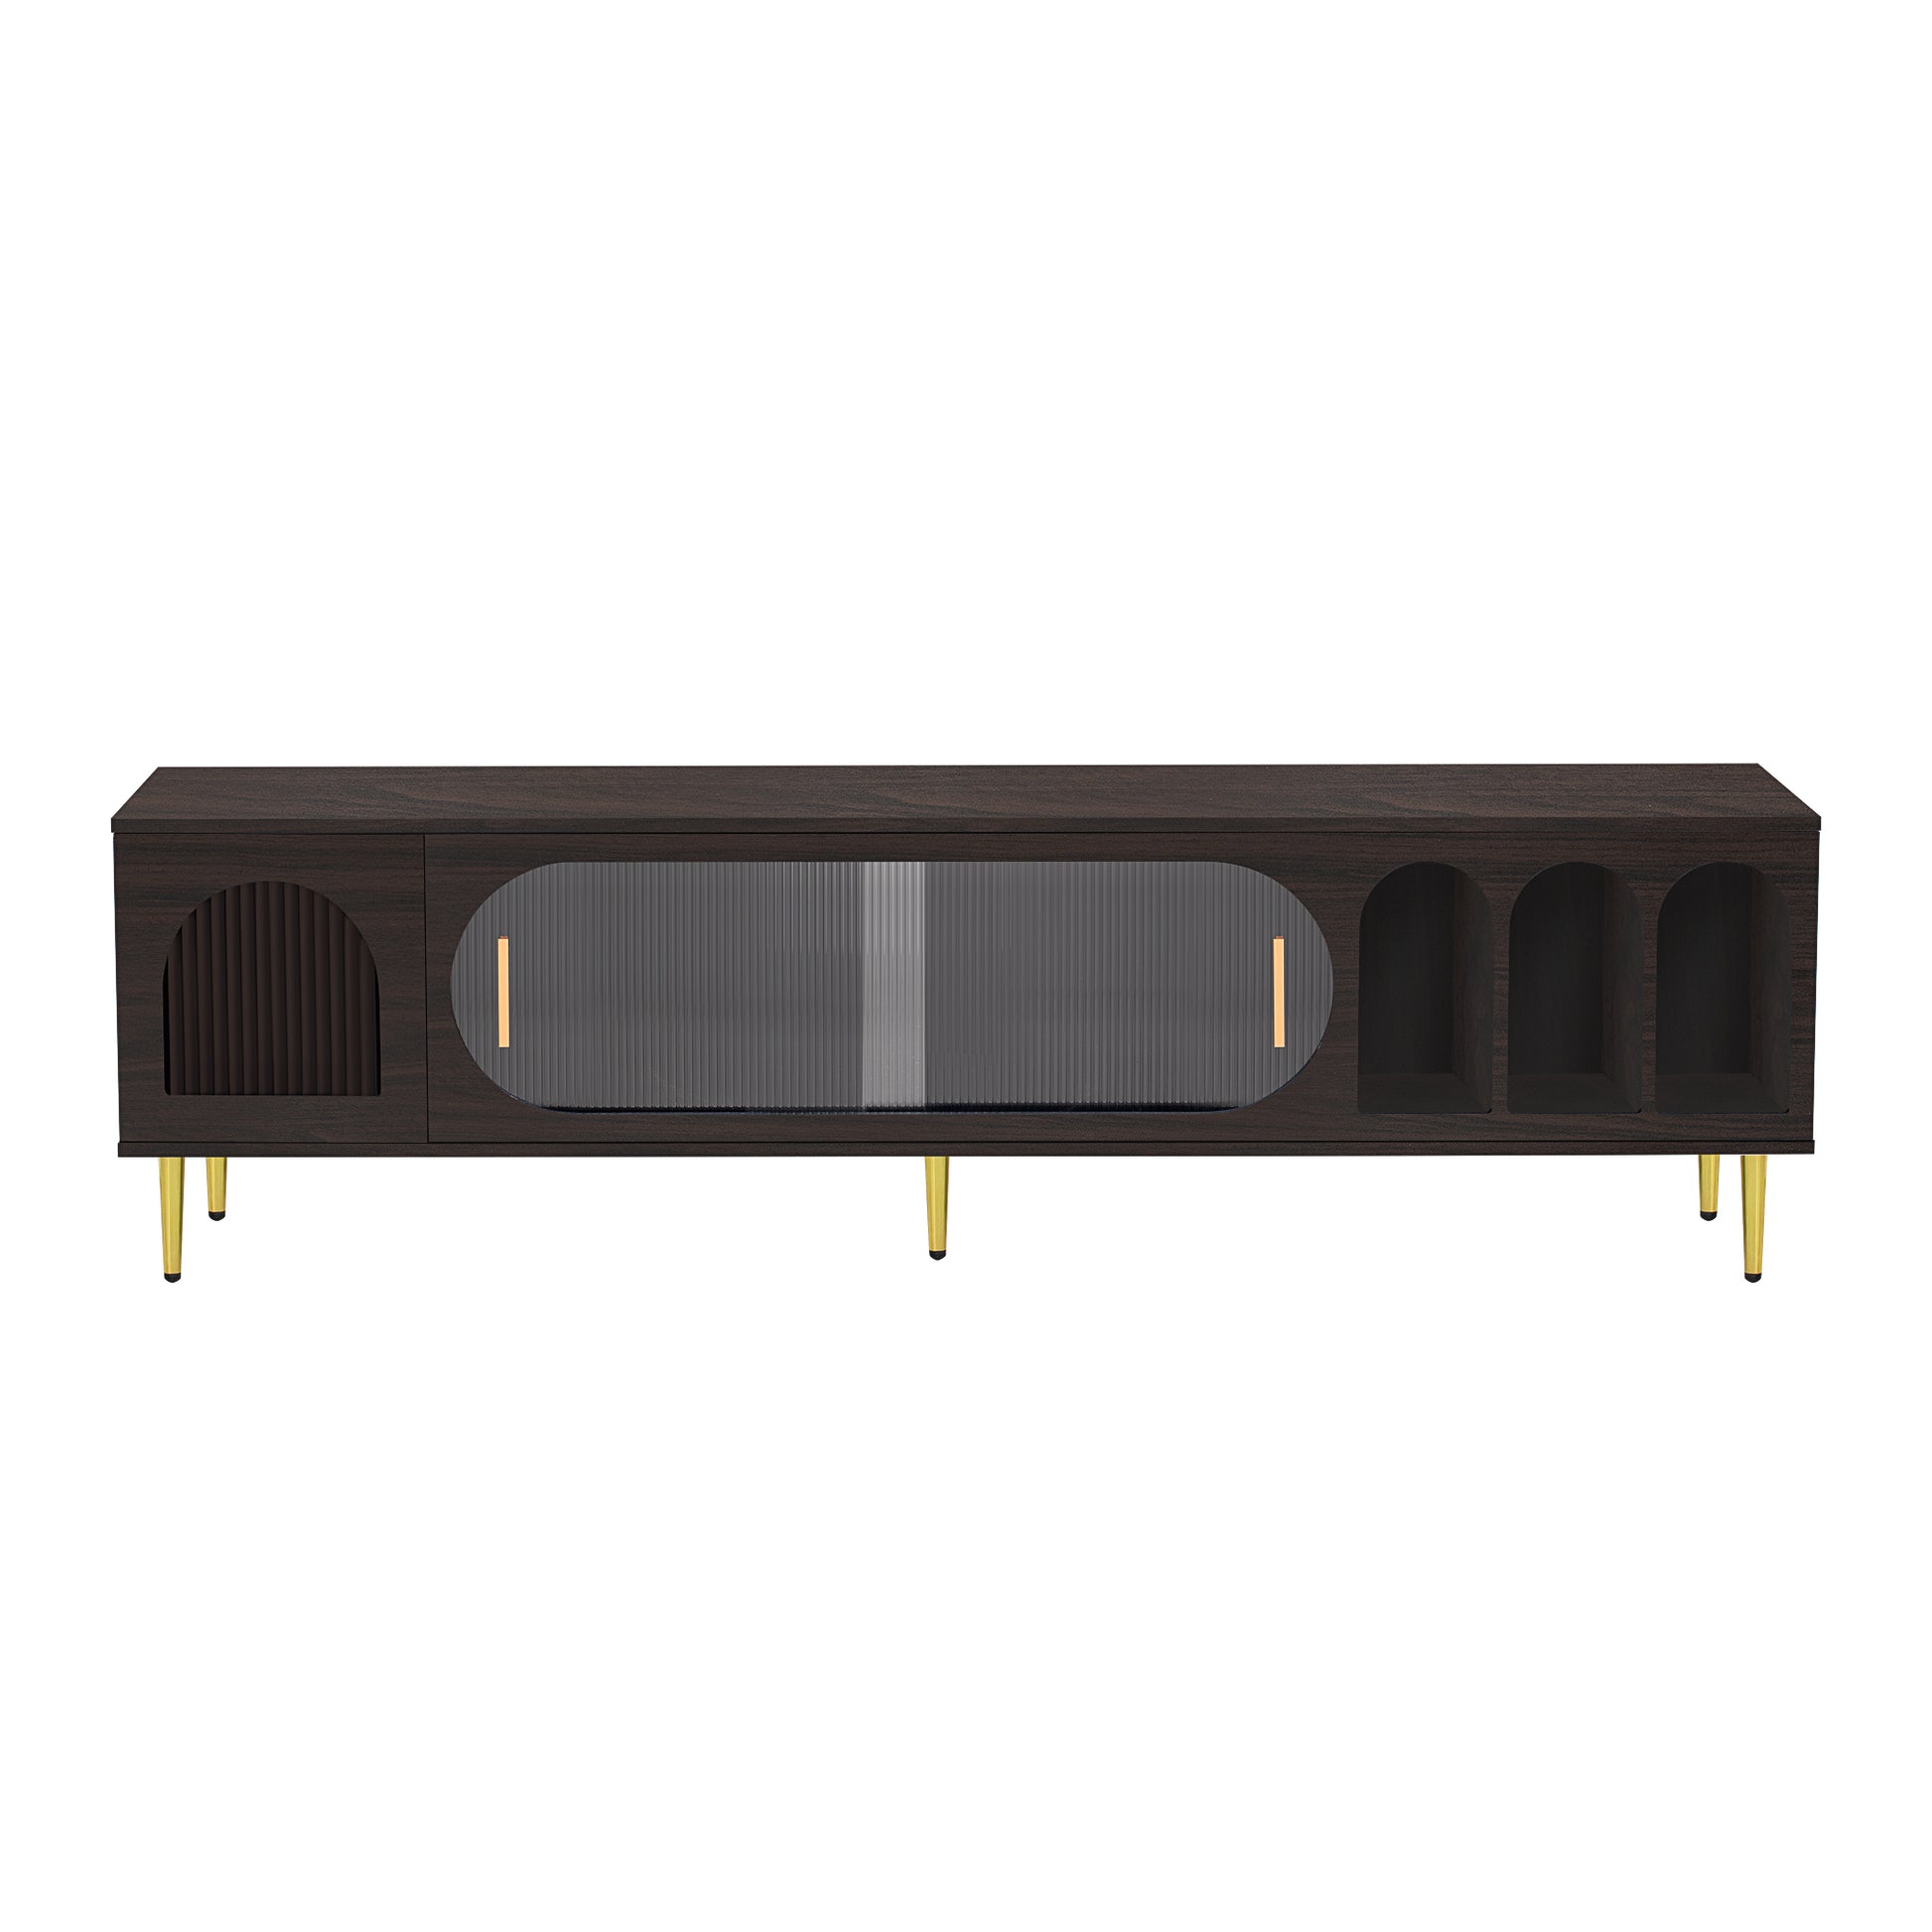 U Can Modern TV Stand for 70 Inch TV, Entertainment brown-mdf